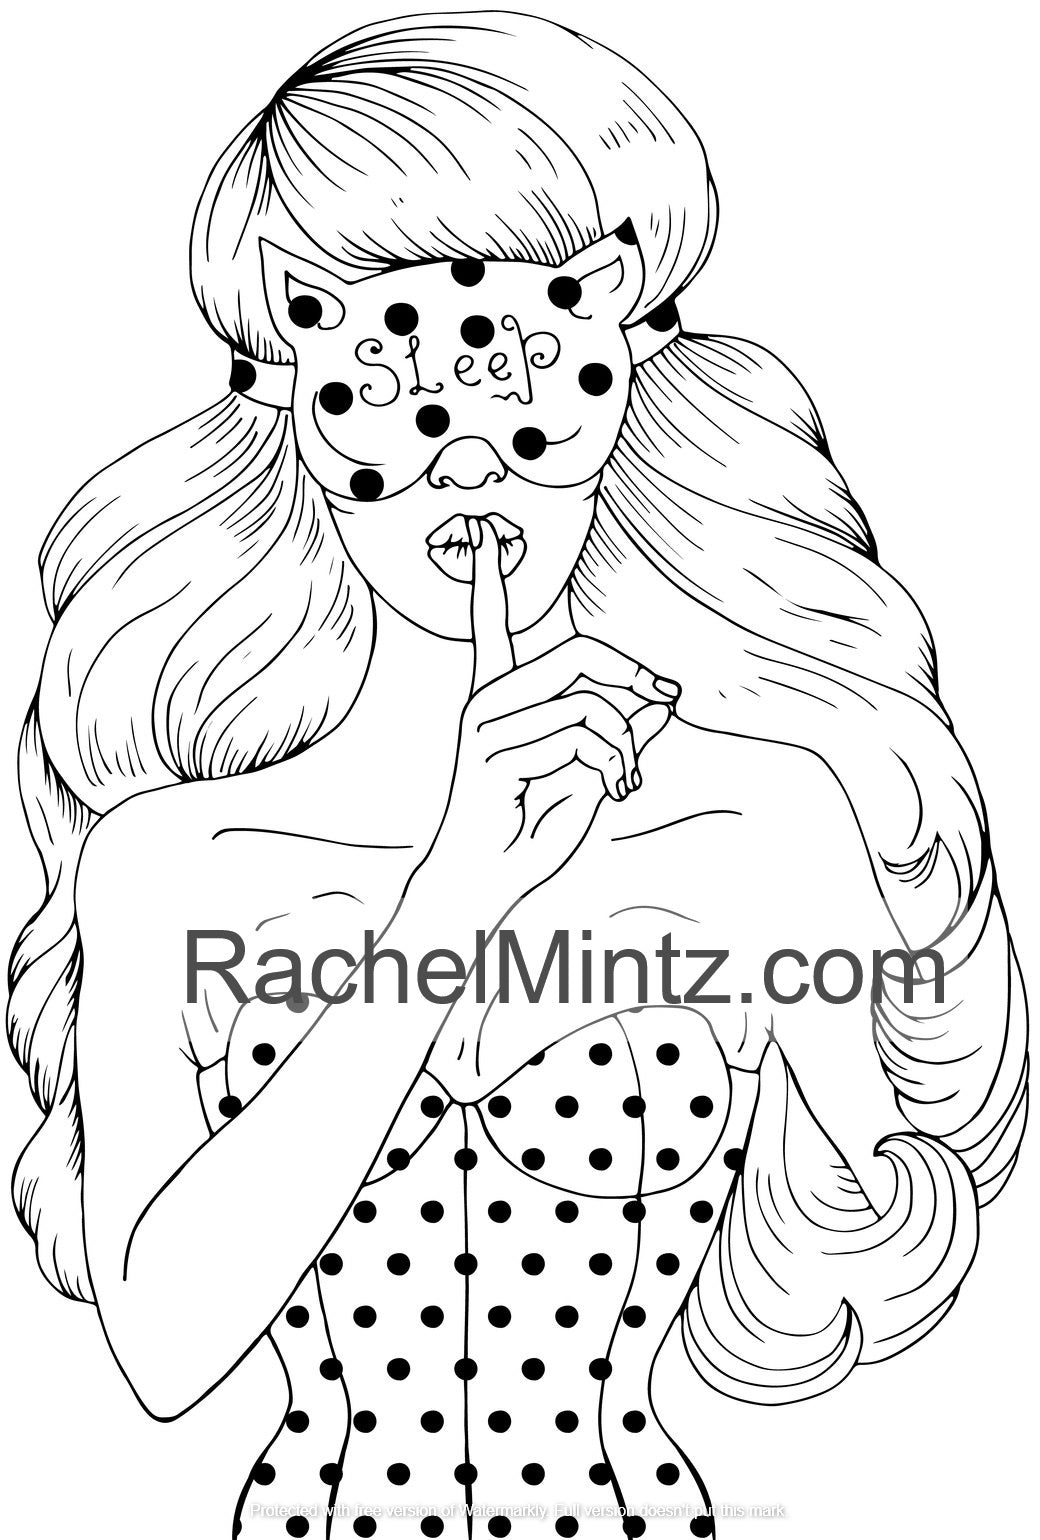 Luscious Hair Beauty - Beautiful Girls With Wavy Long Tempting Hairstyles Poses For Adults (PDF Coloring Book)